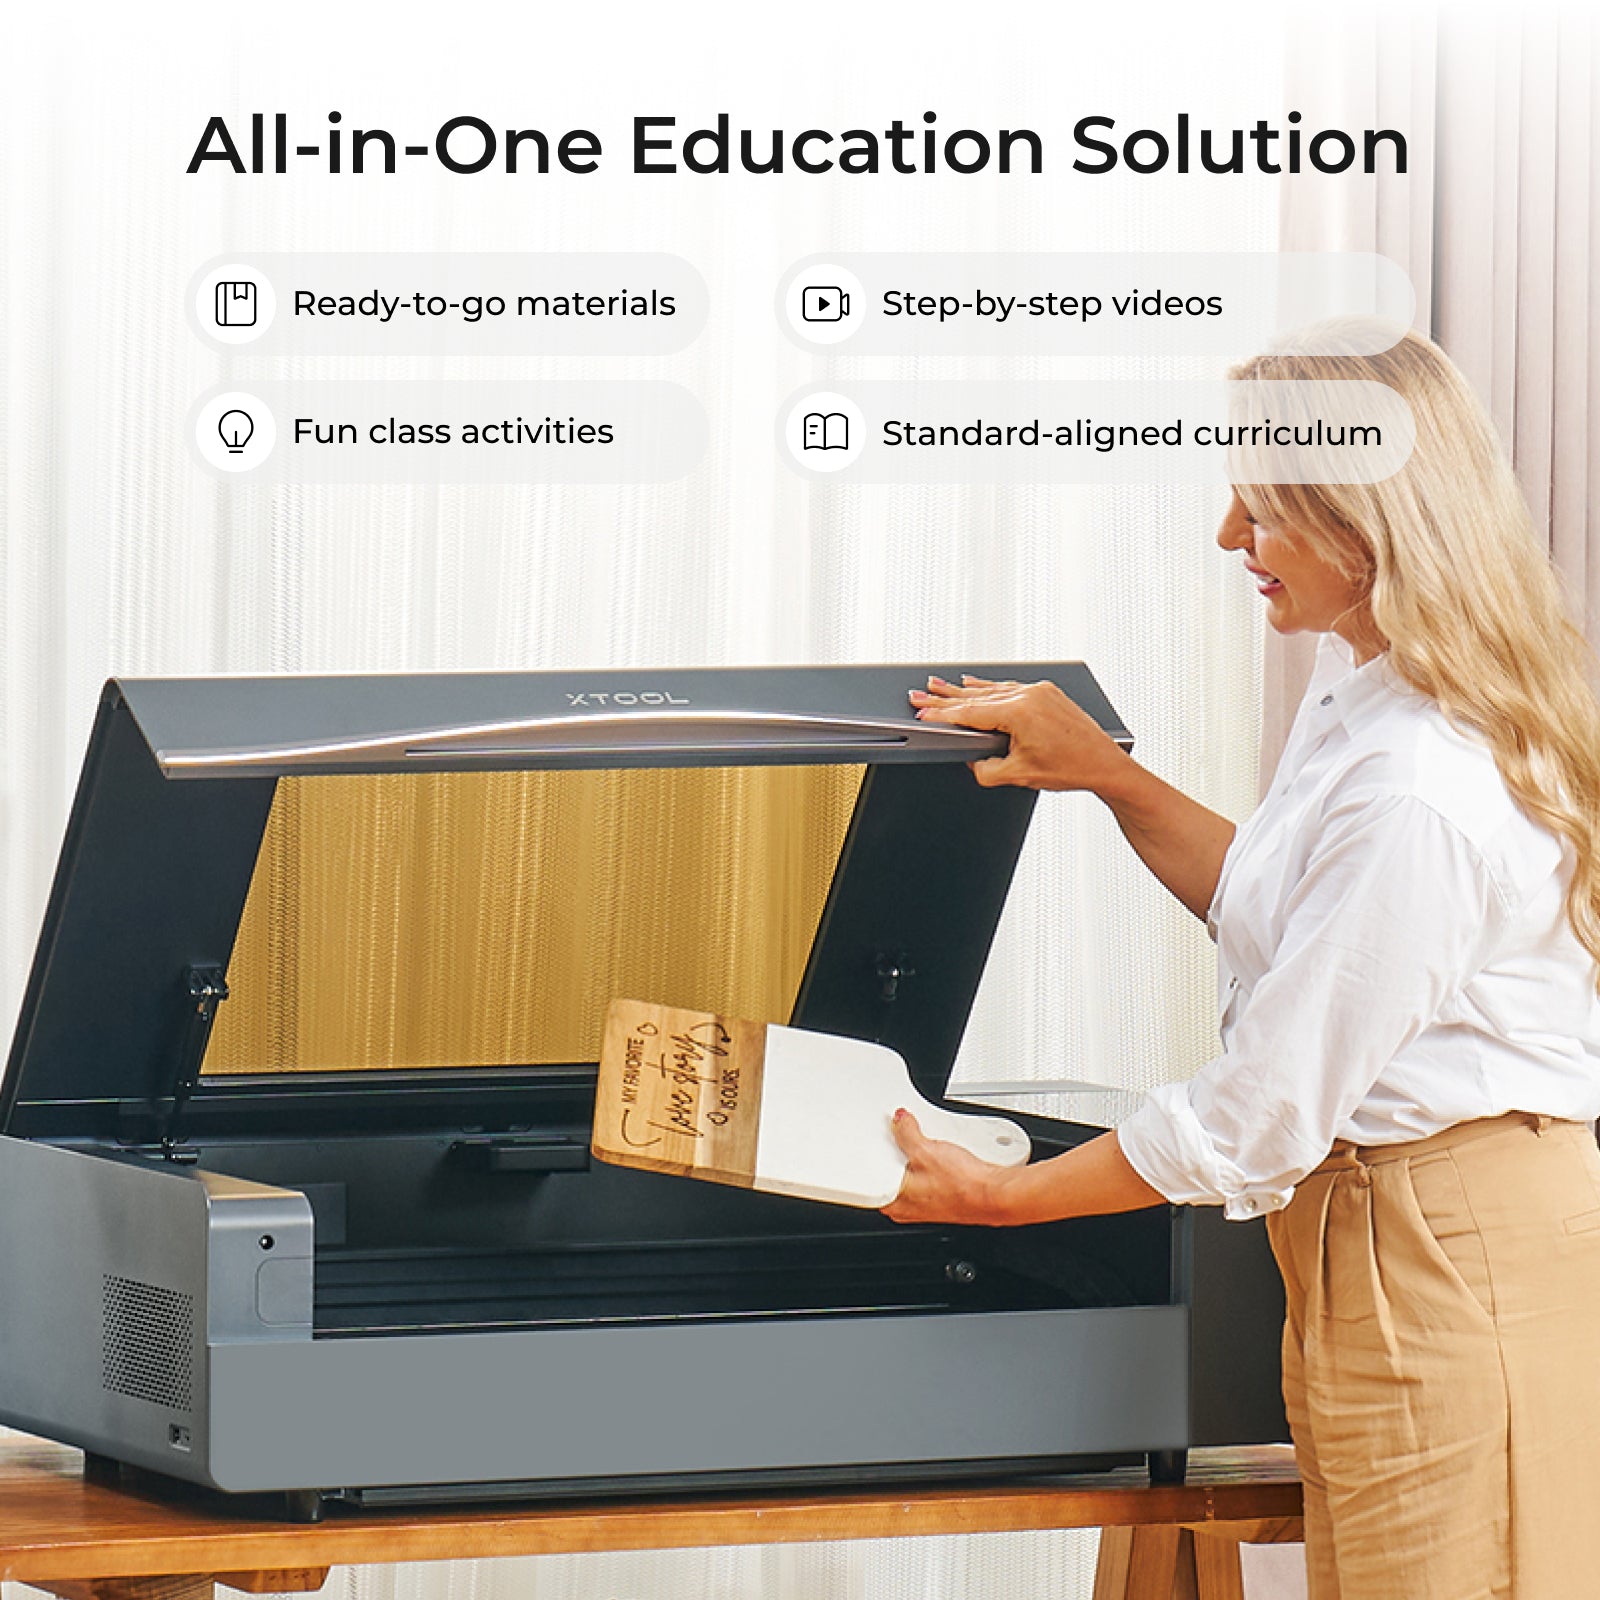 All-in-One Education Solution by xTool P2